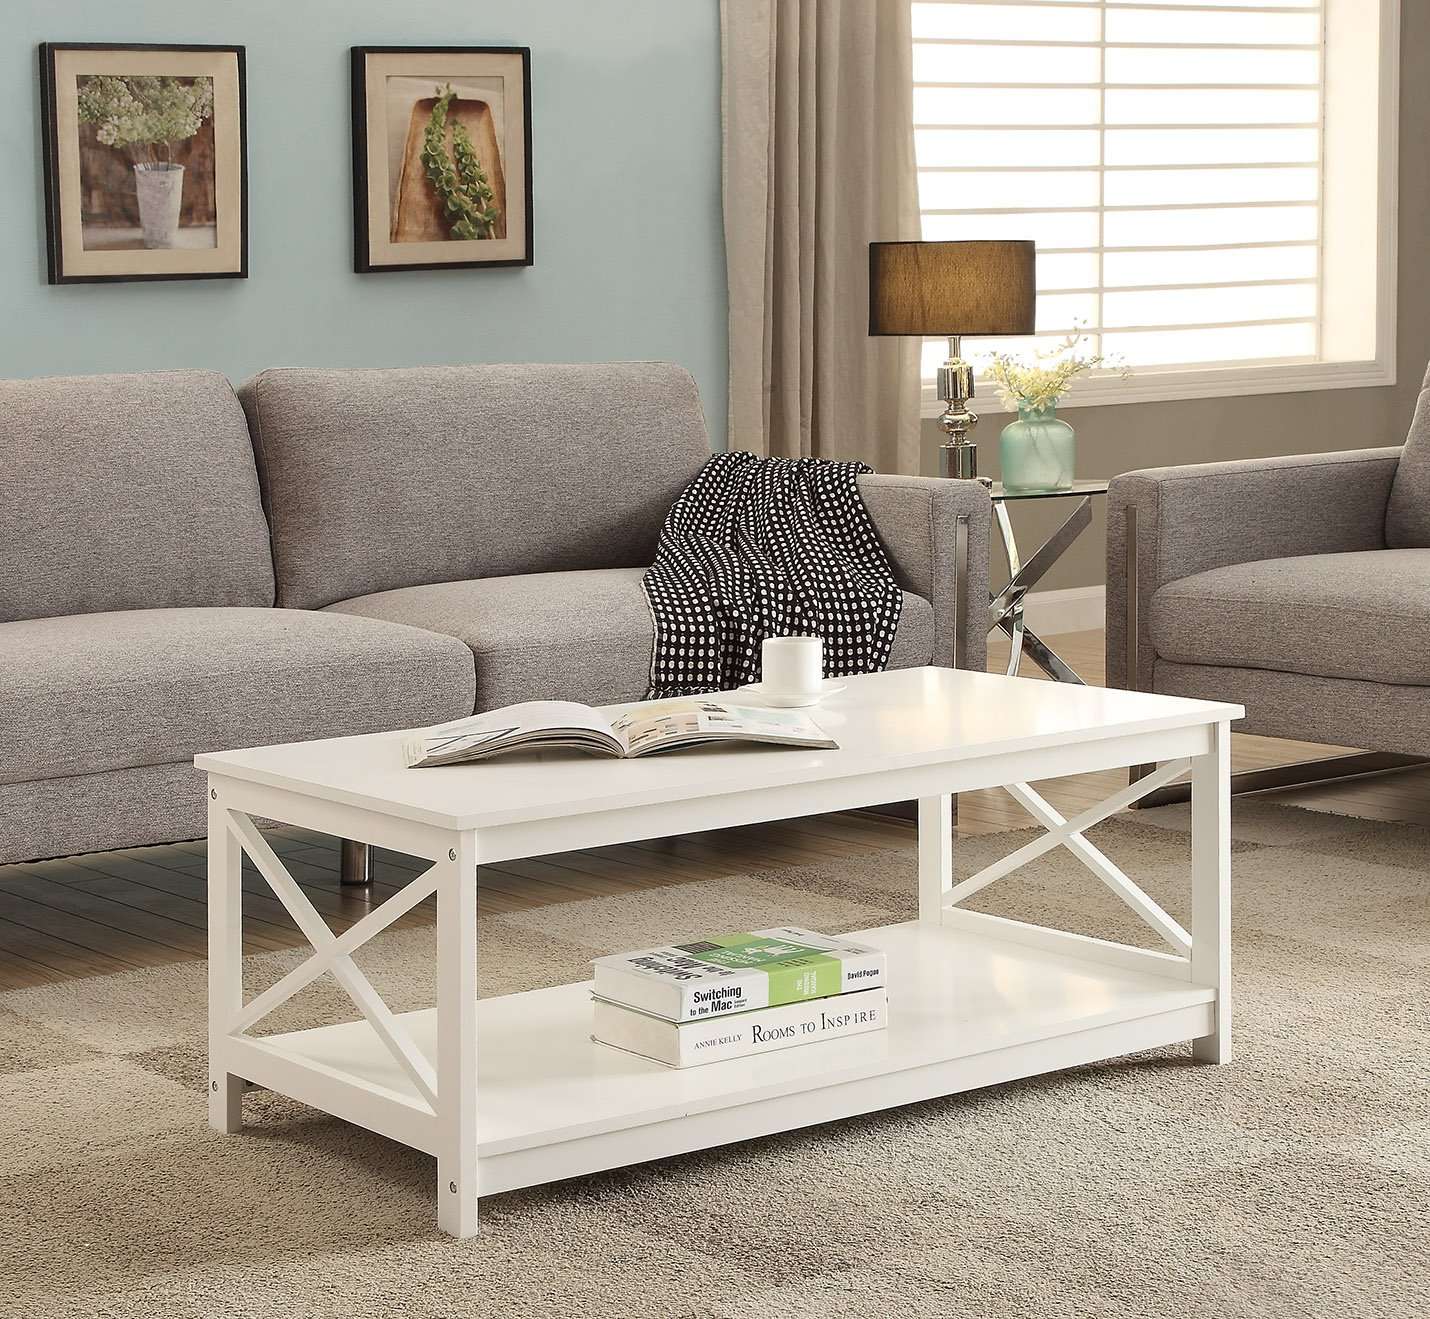 40 Incredibly Cheap Coffee Tables You Can Buy for Under $100 in 2020